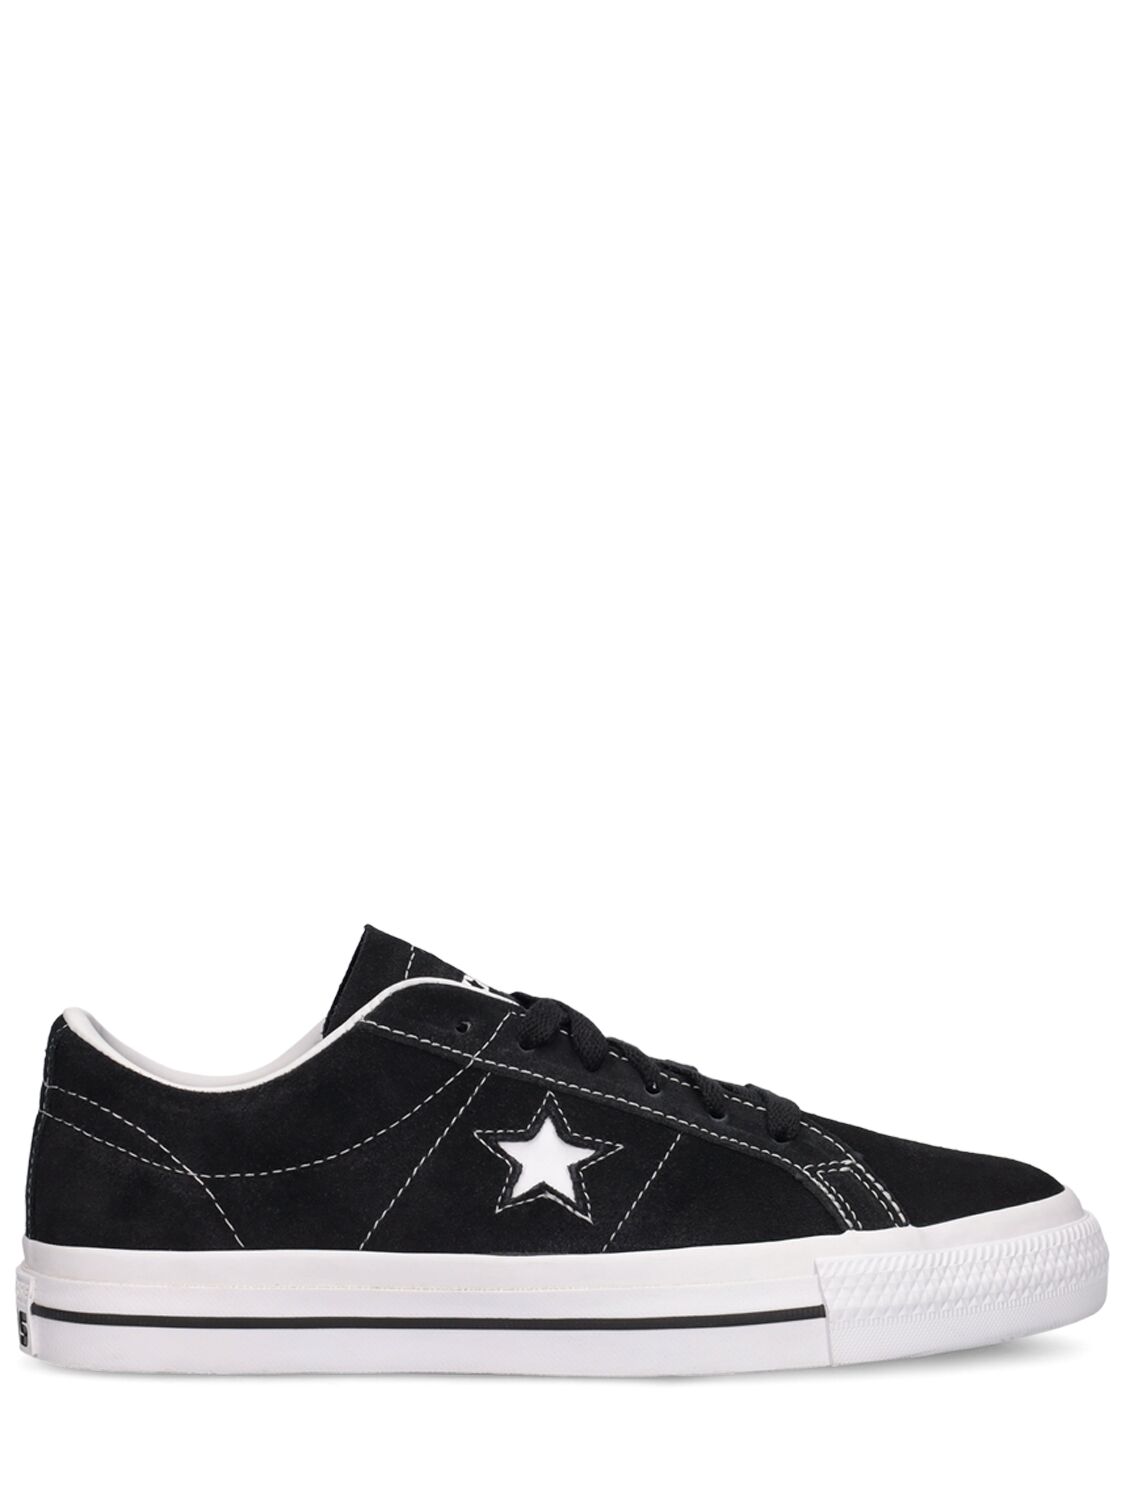 CONVERSE ONE STAR PRO SUEDE SNEAKERS